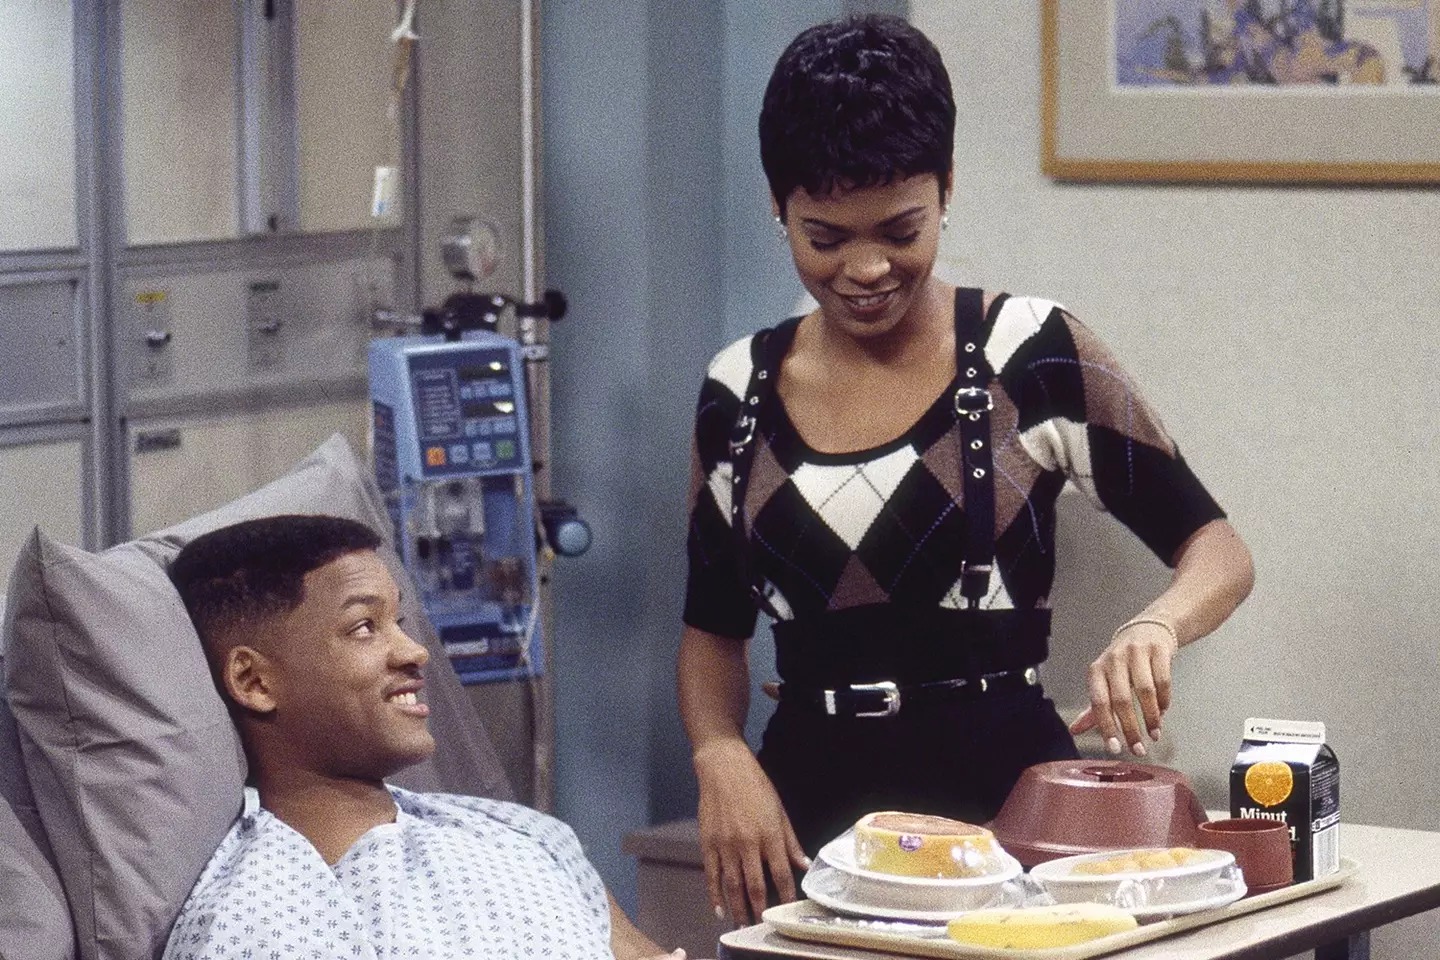 Jada auditioned for the role of Will's girlfriend on the Fresh Prince but Nia Long was hired instead. (